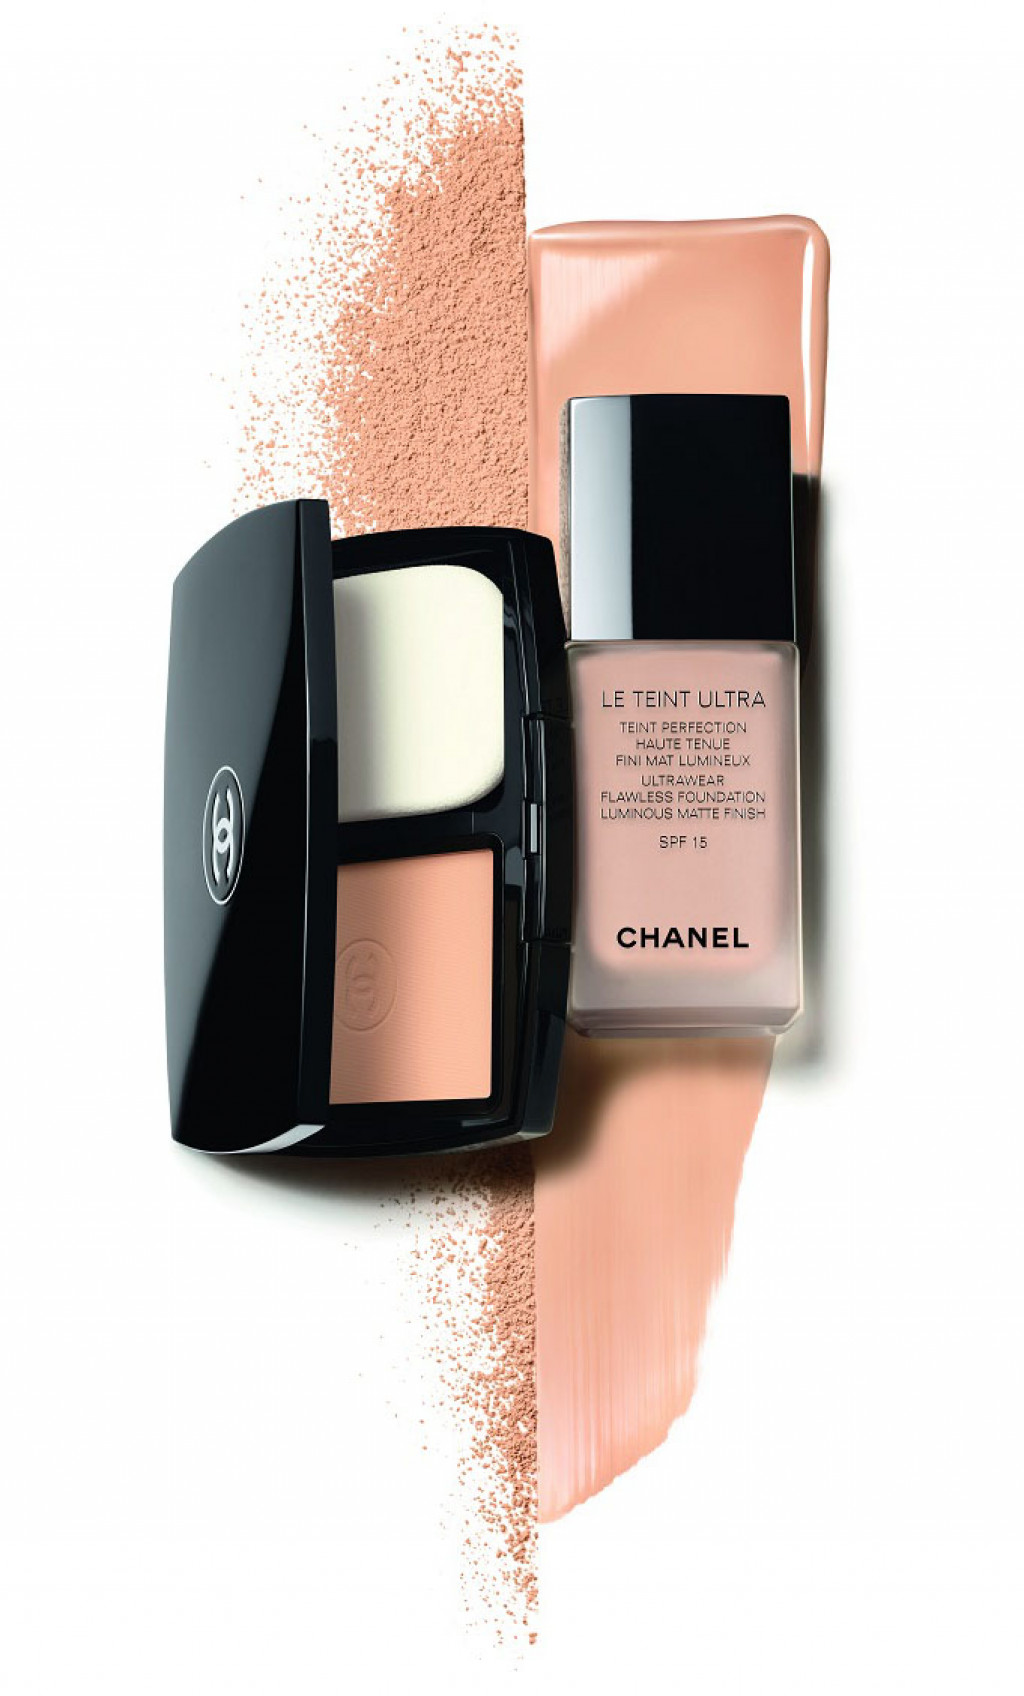 Testing of the Chanel Ultra le Teint Flawless Finish Compact